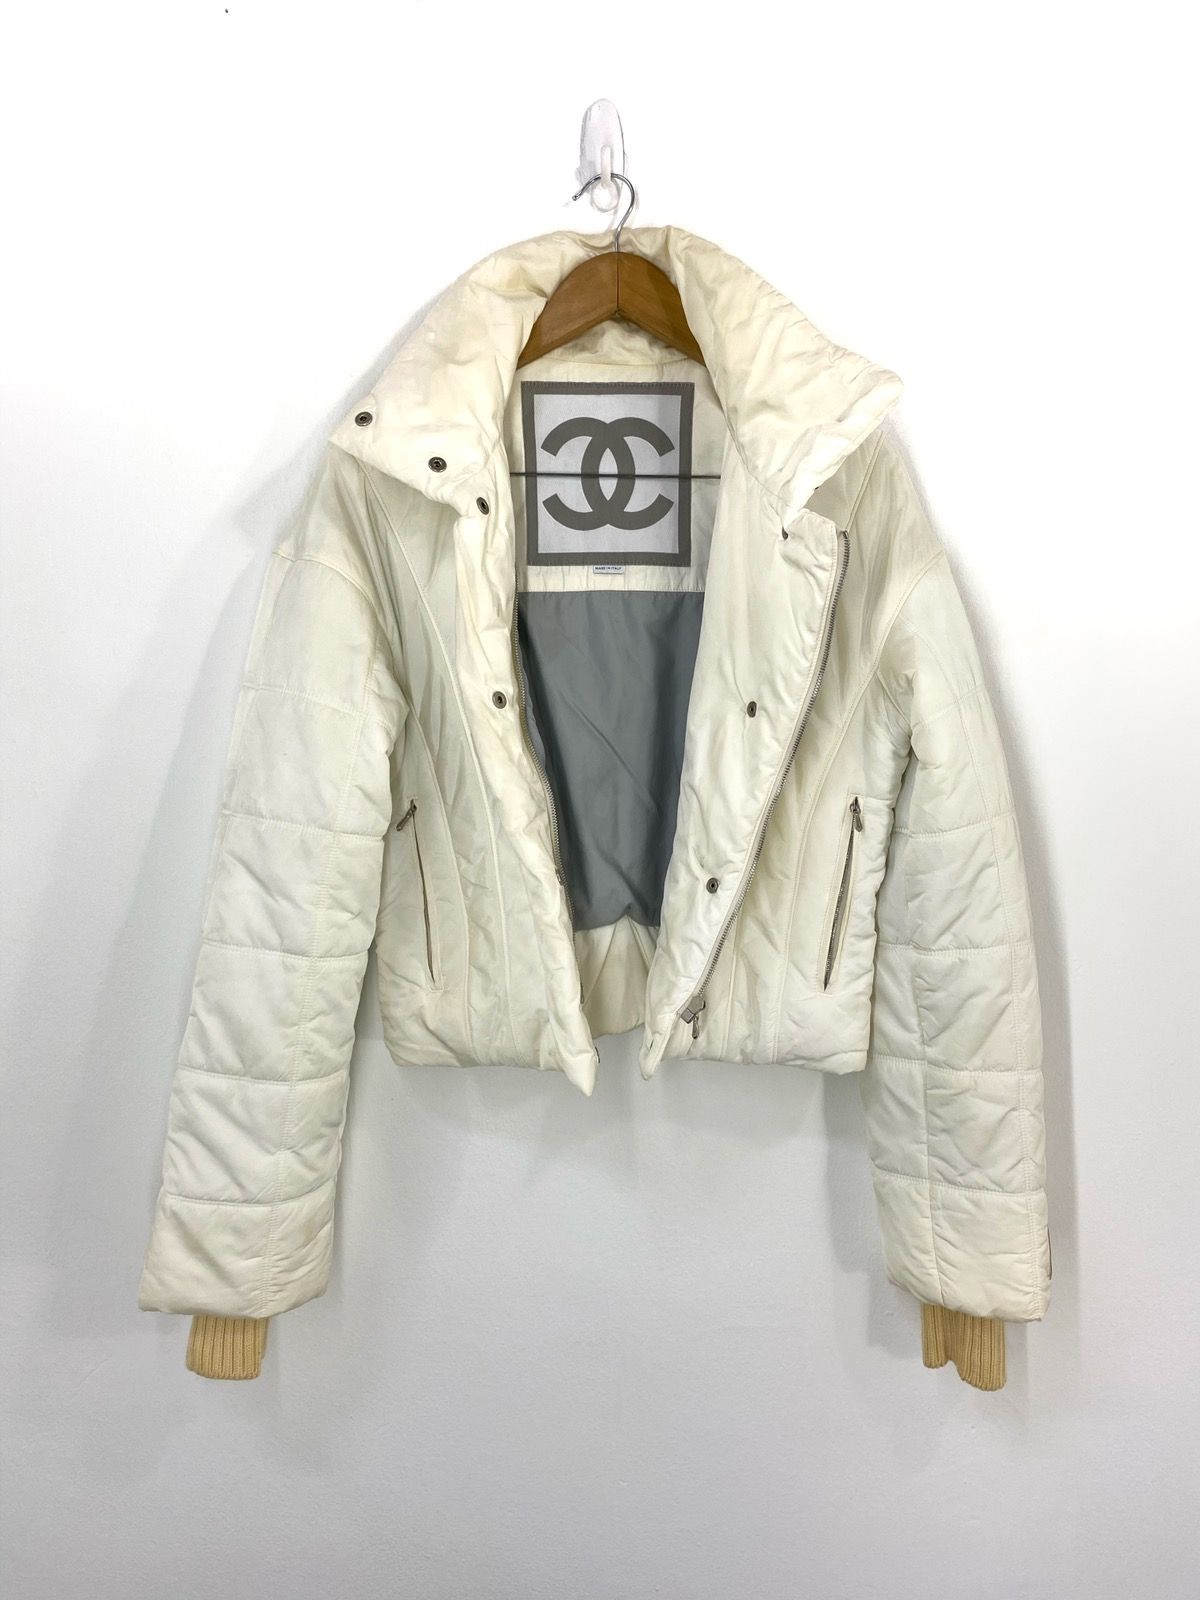 Chanel Authentic Chanel White Puffer Jacket Quilted Design